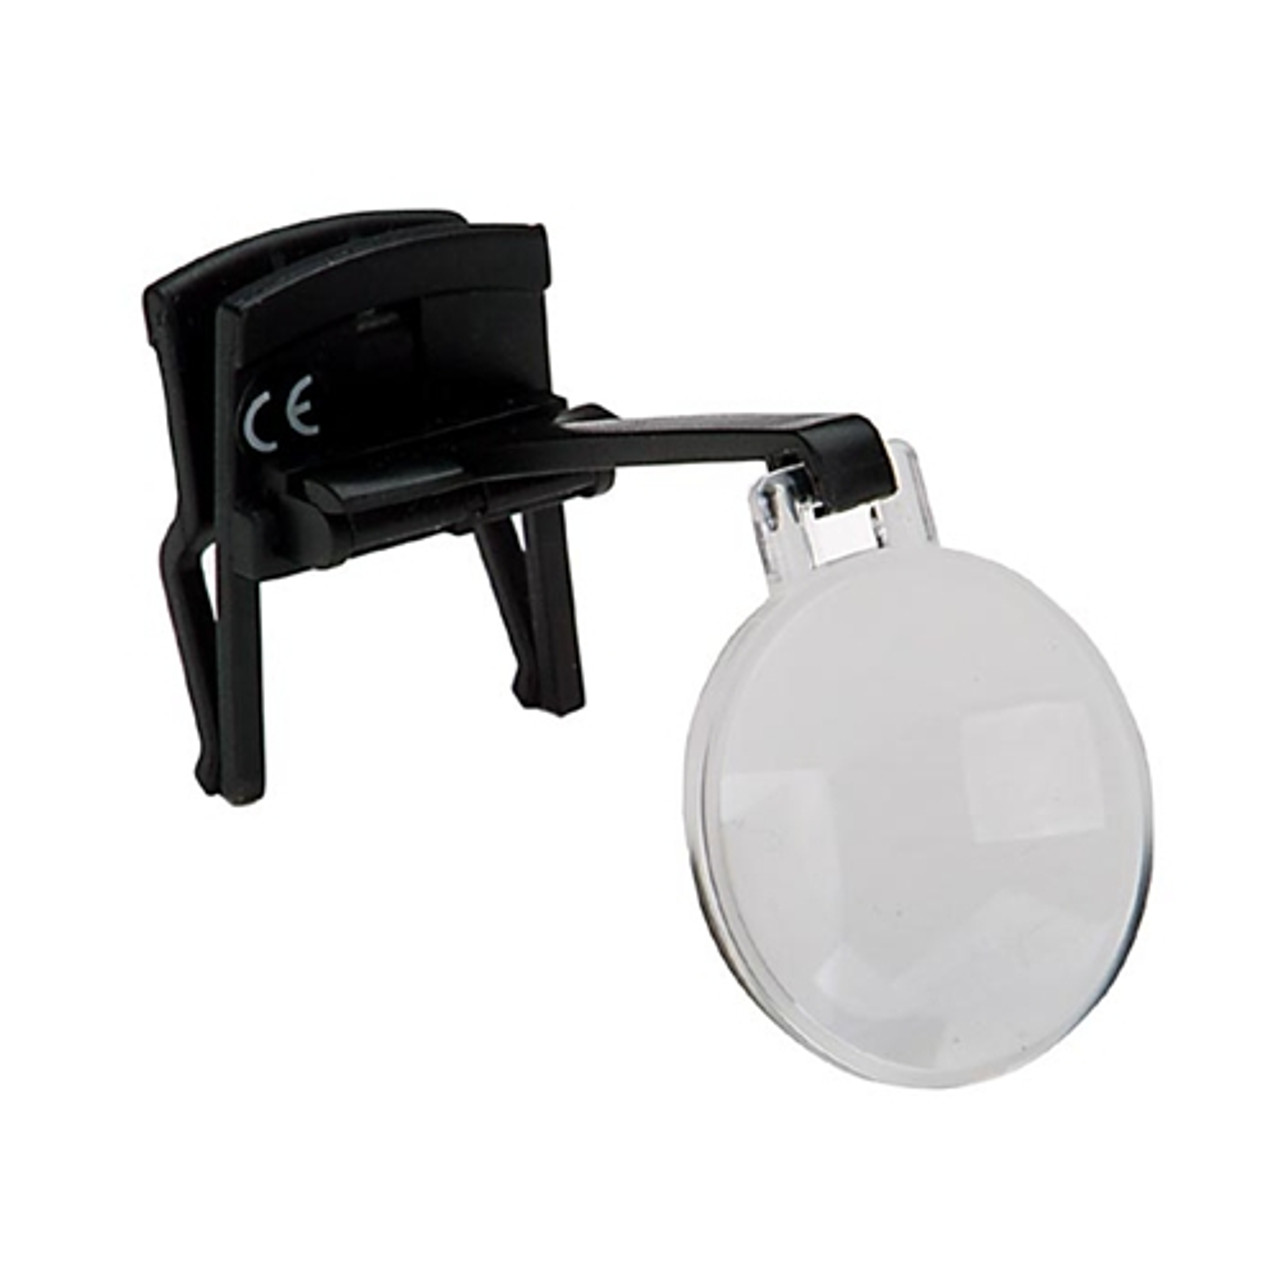 2X Glasses Style Magnifier Magnifying Glass with Clip for Low